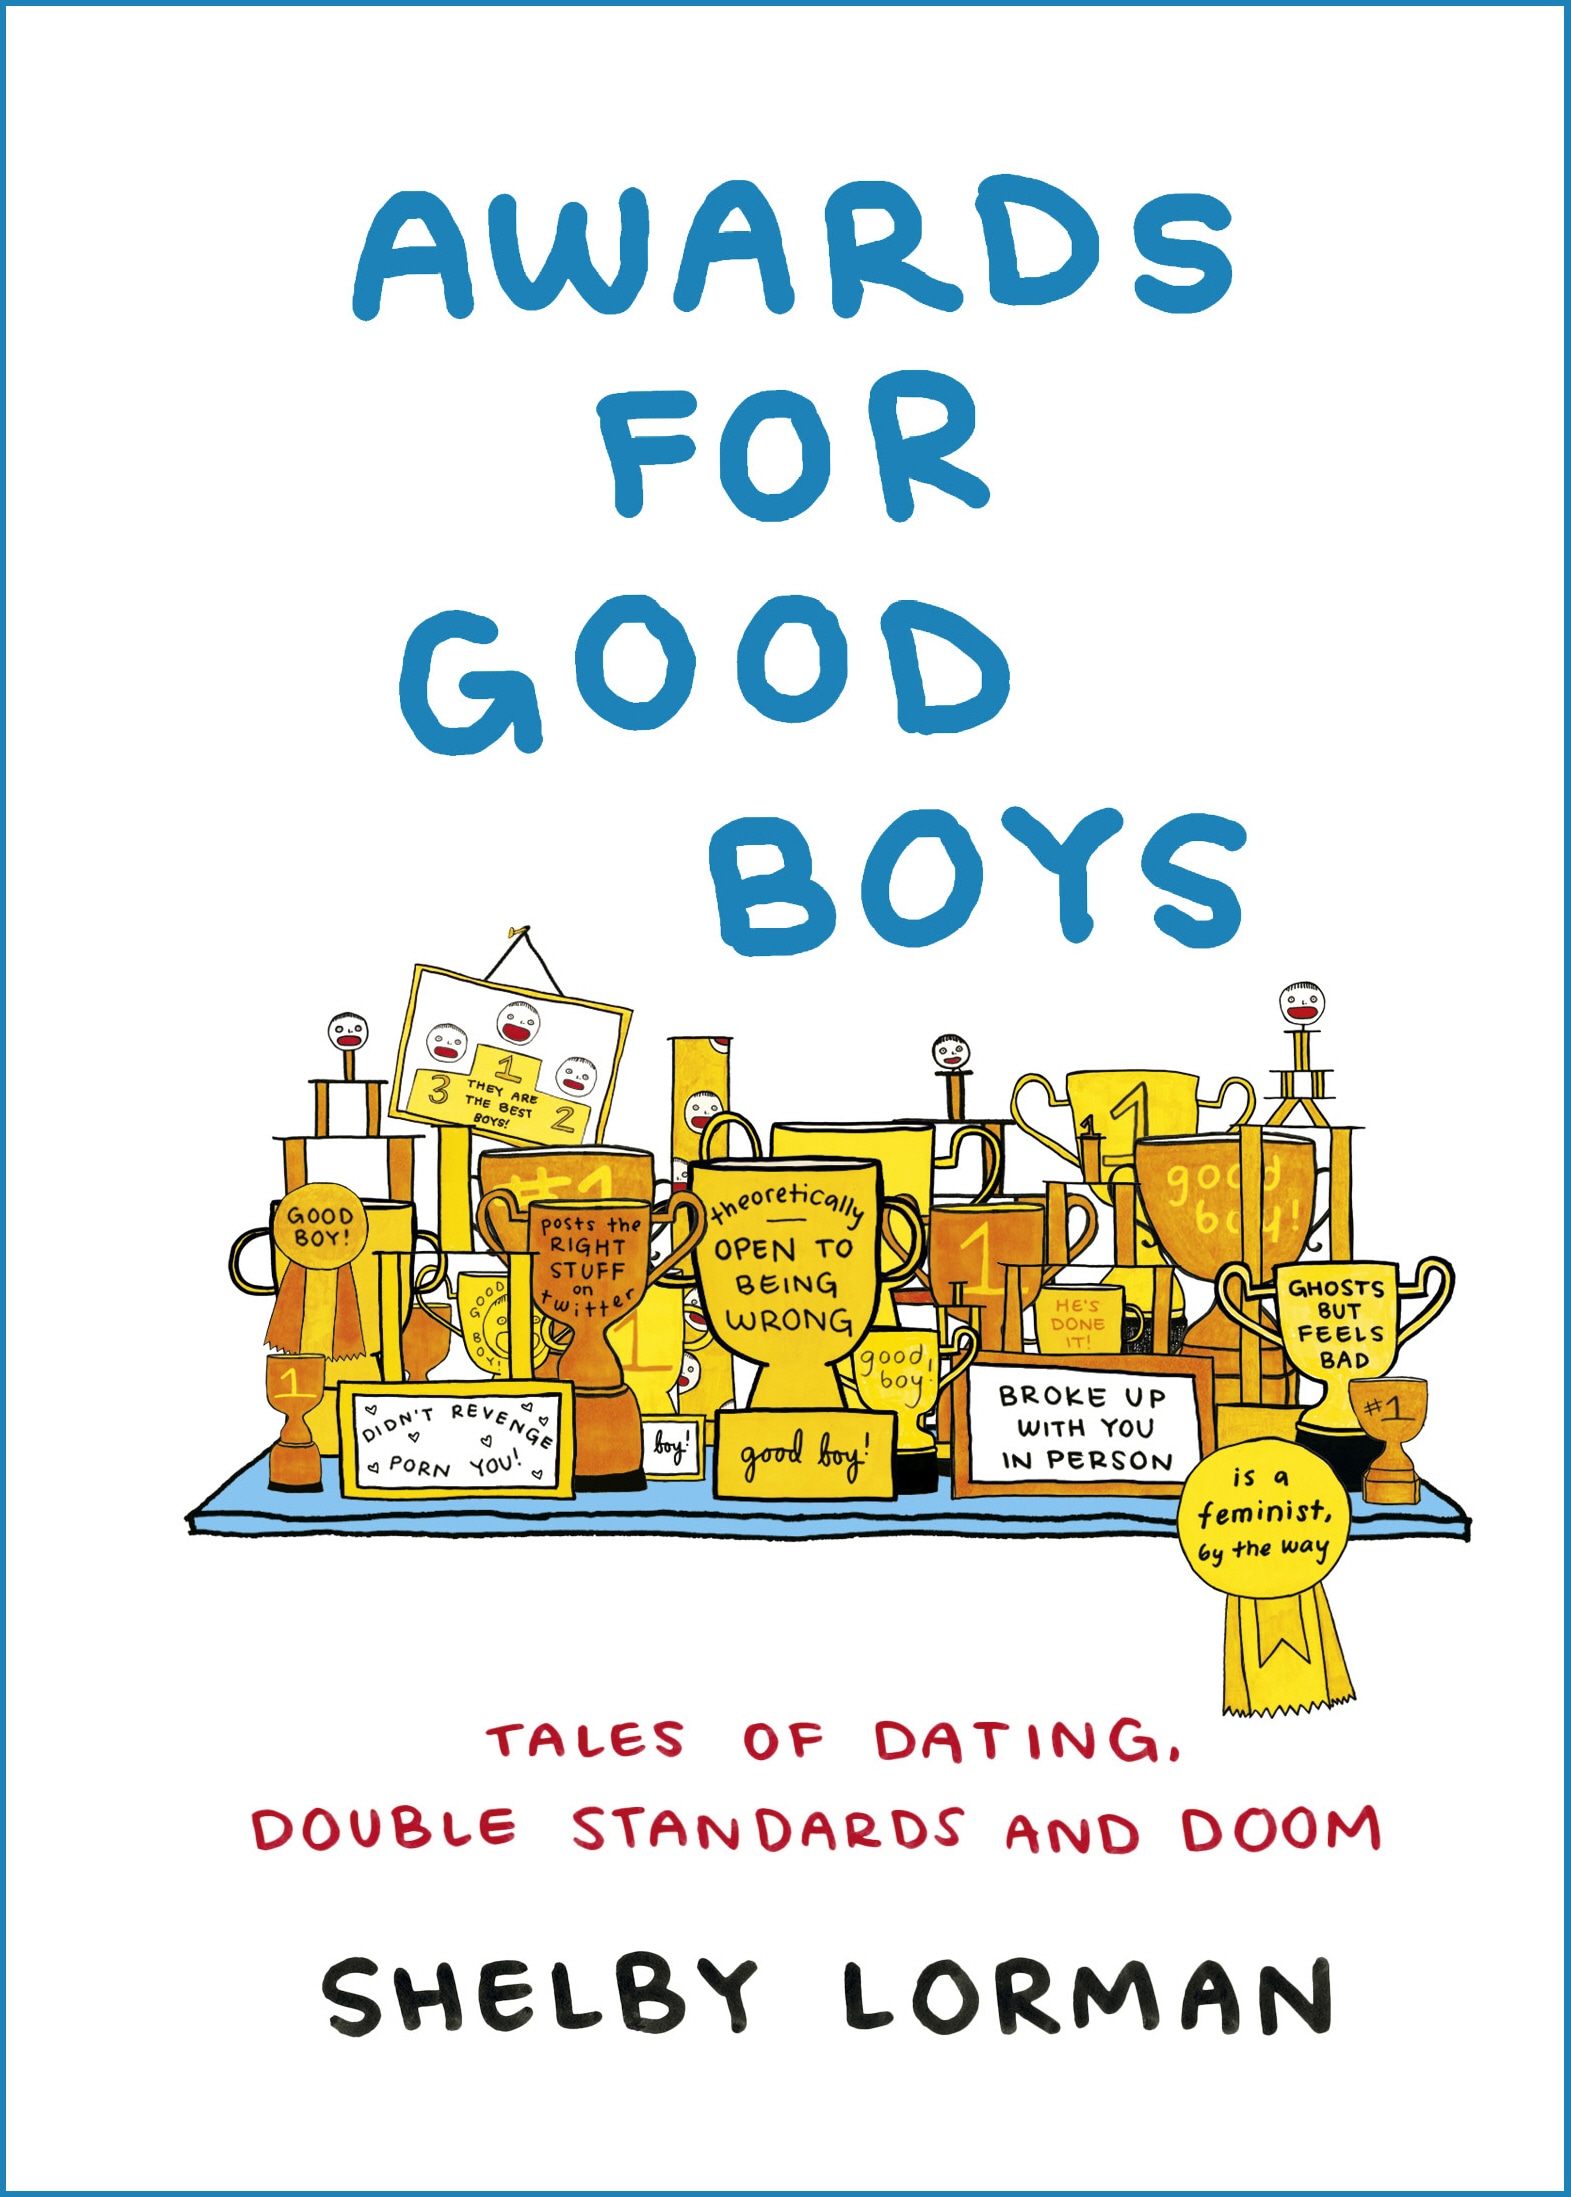 Book “Awards for Good Boys” by Shelby Lorman — November 14, 2019